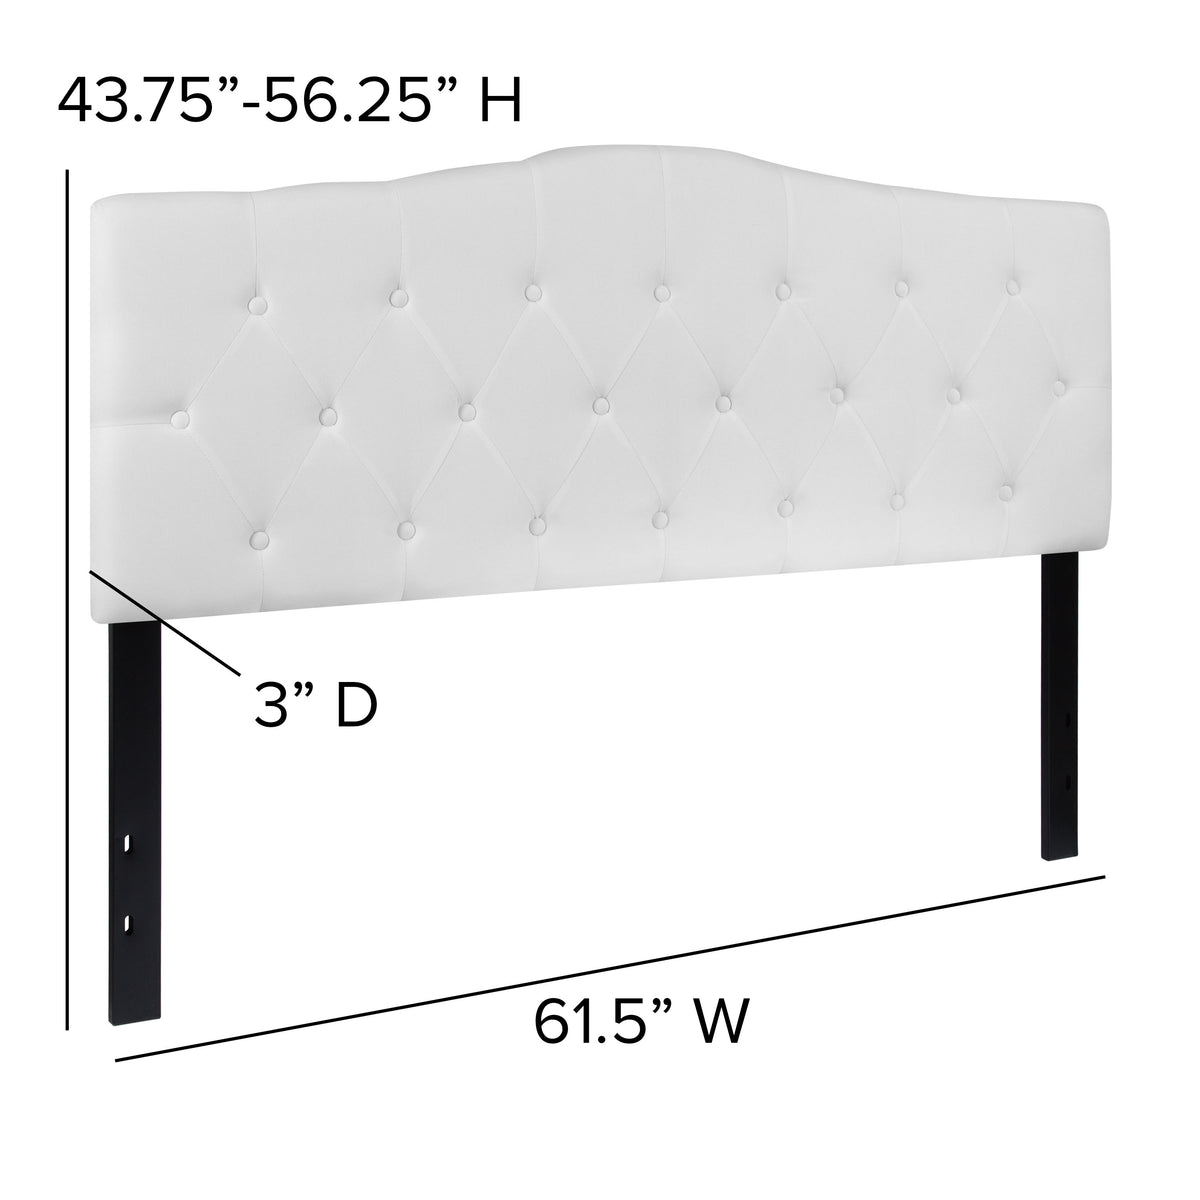 White,Queen |#| Arched Button Tufted Upholstered Queen Size Headboard in White Fabric